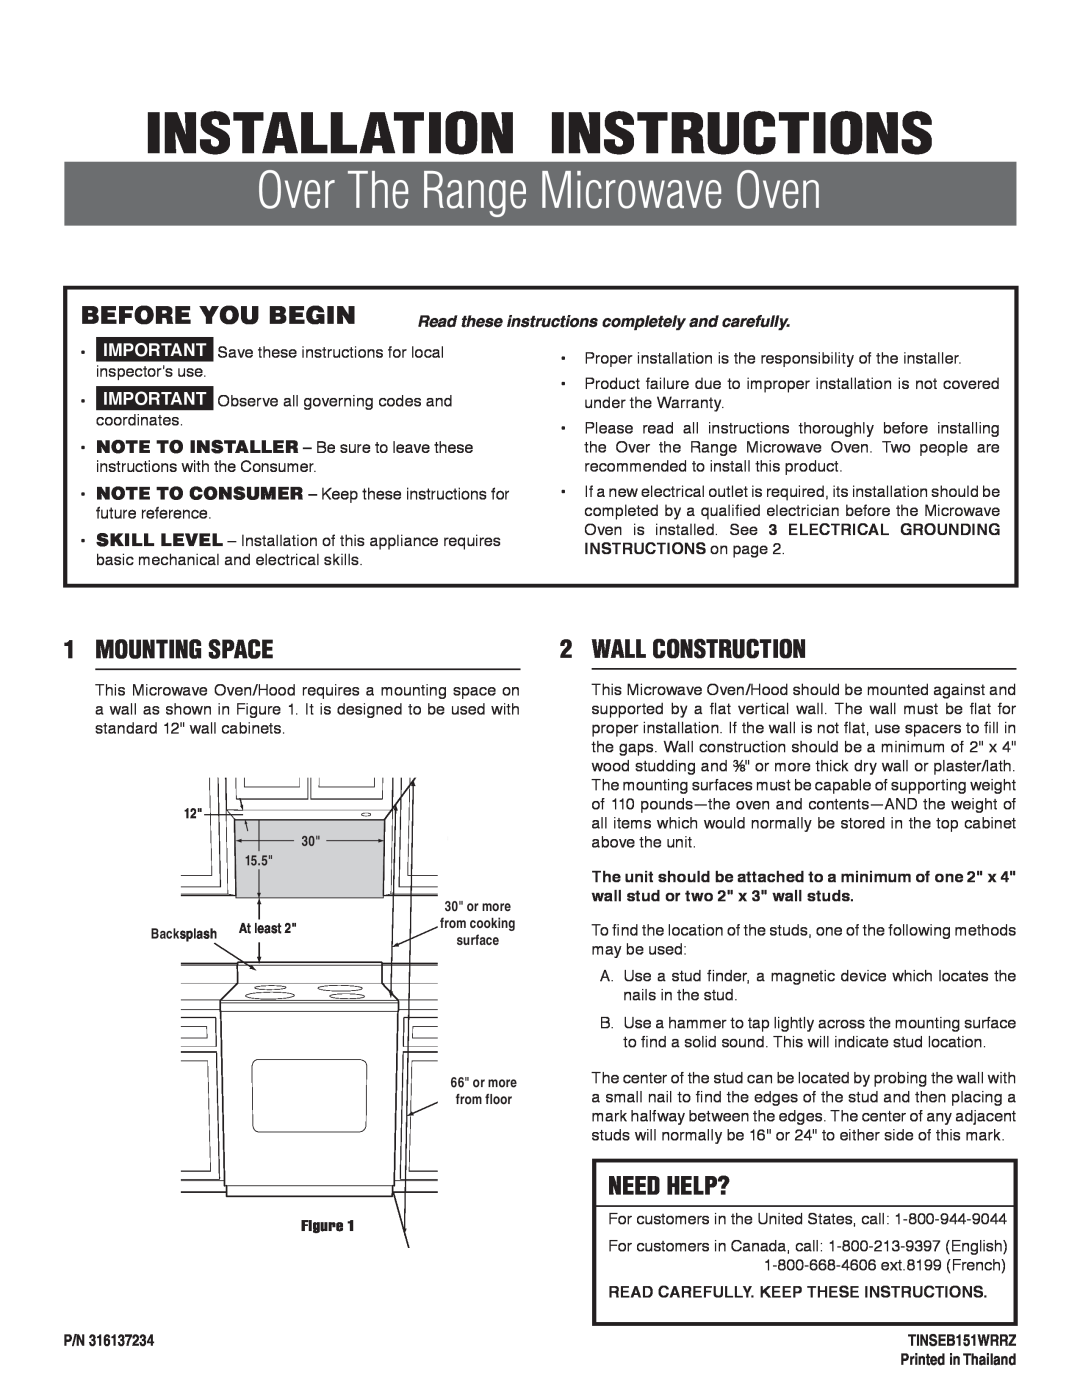 Frigidaire 316137234 installation instructions Before You Begin, Mounting Space, Wall Construction, Need Help? 